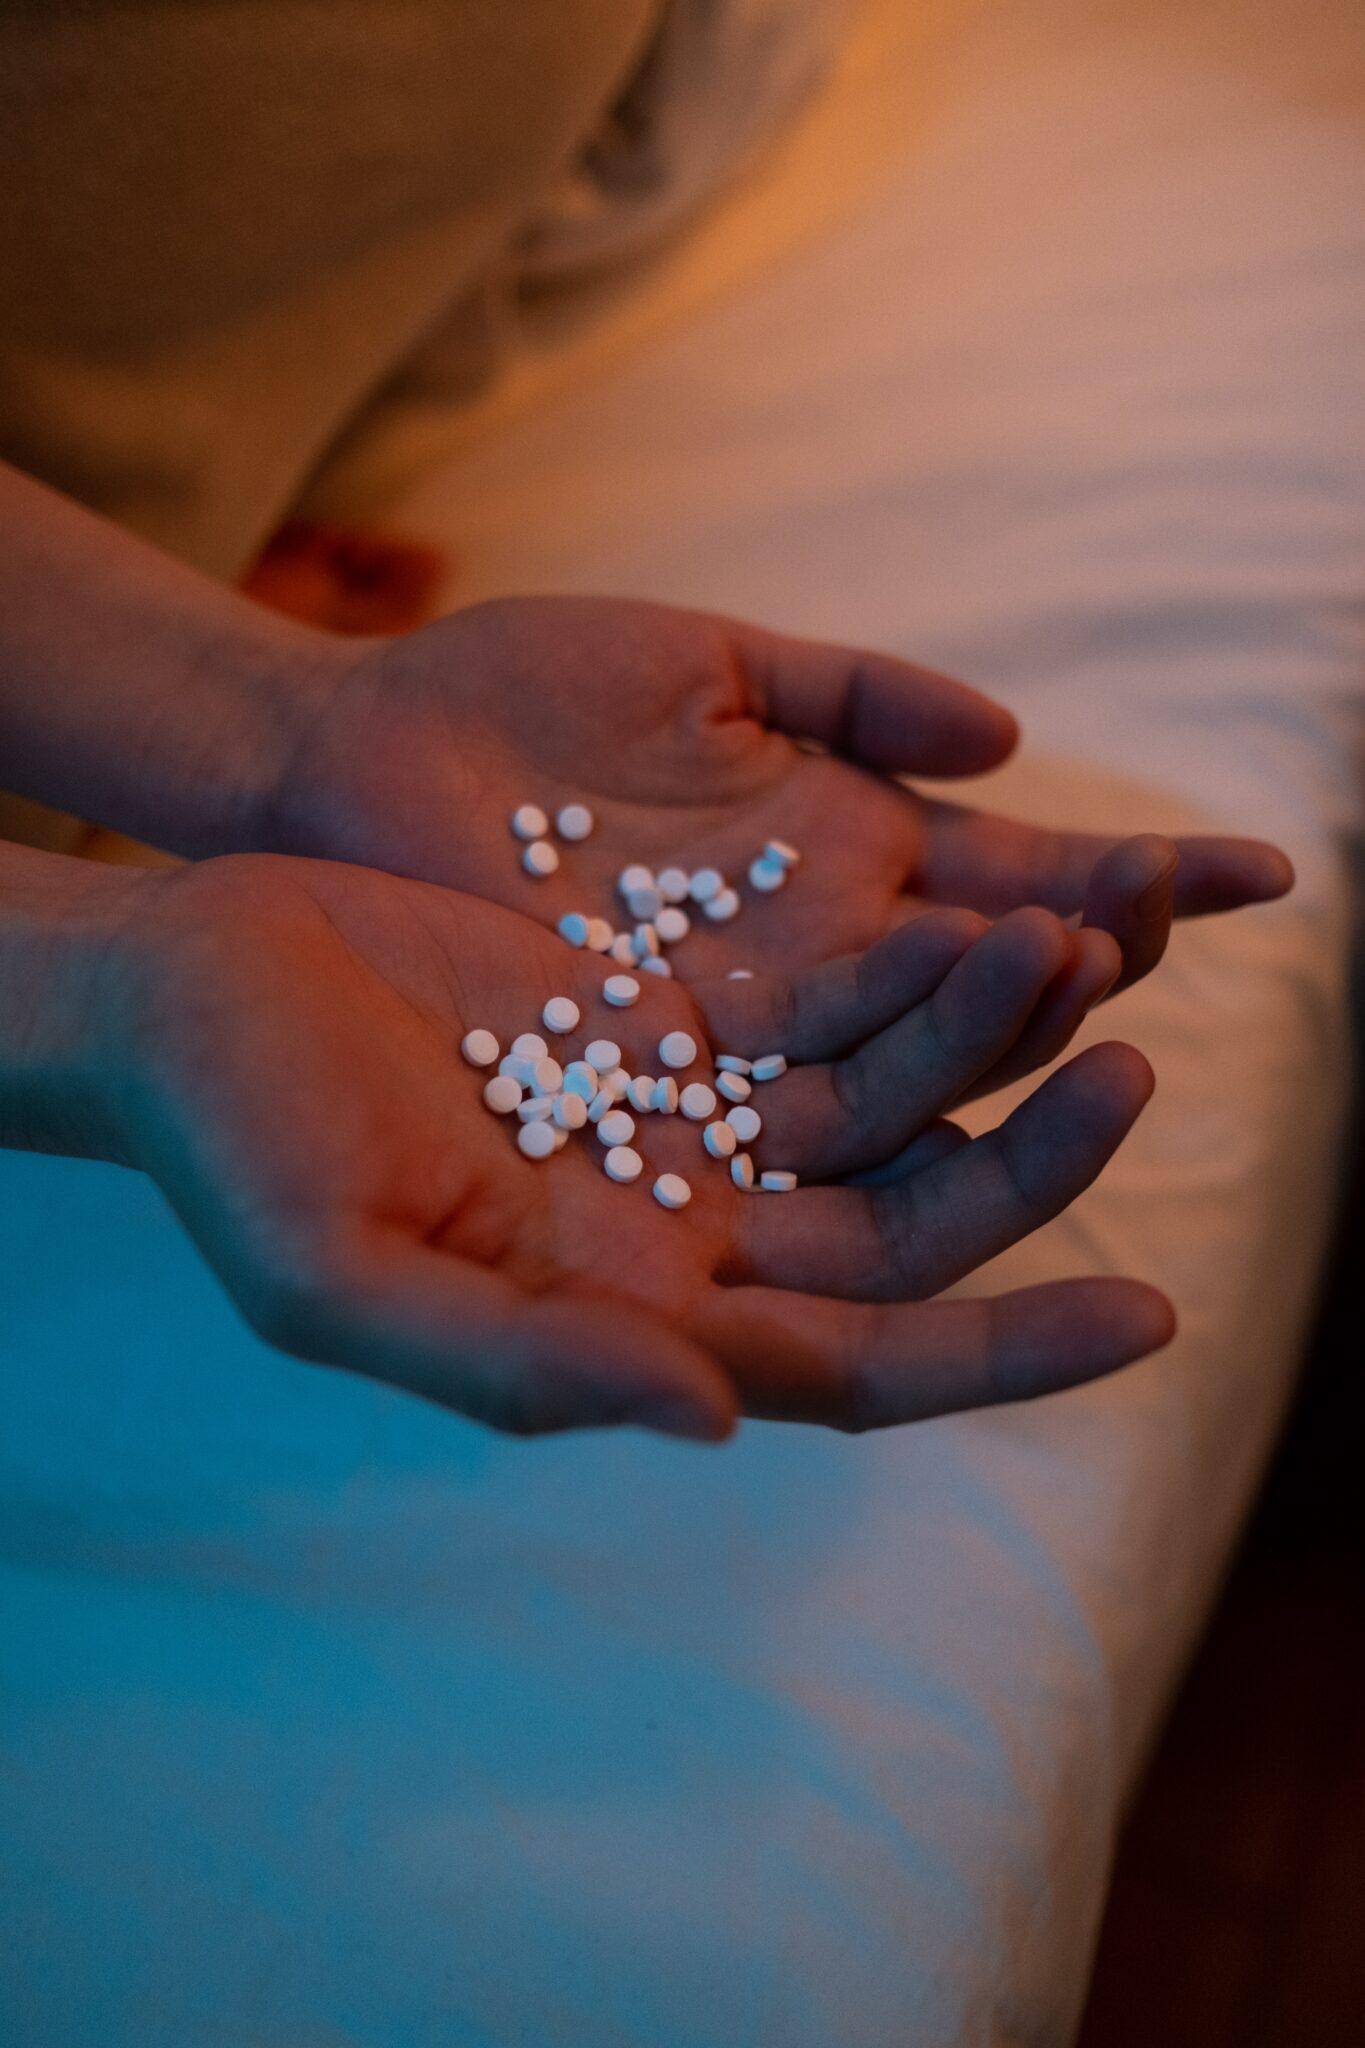 Can You Overdose On Melatonin- Important Things To Know Before Taking Melatonin